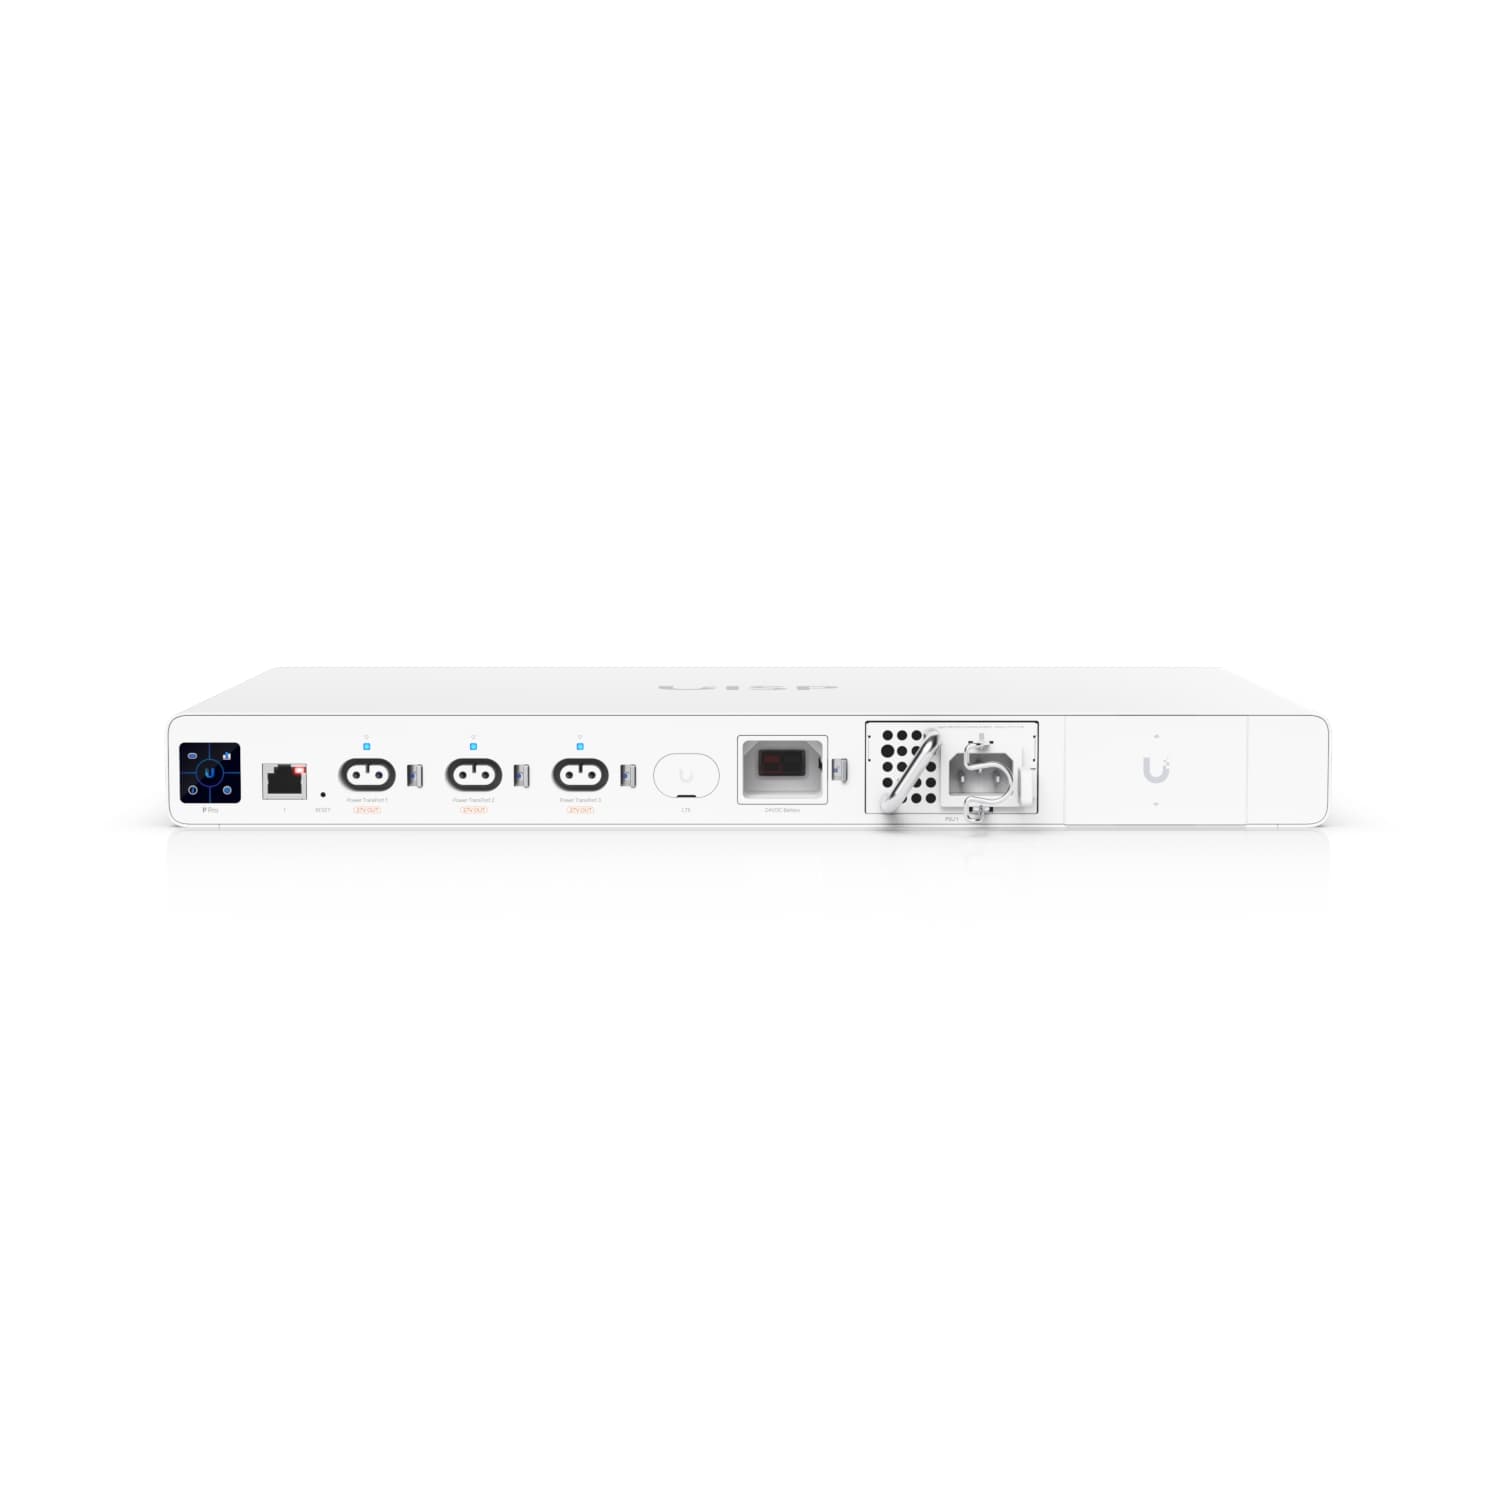 Ubiquiti UISP Power Professional 10100 MbE RJ45 LAN PortUniversal AC inputsSuit UISP Console RouterRouter ProSwitchSwitch Pro  Incl 2Yr Warr